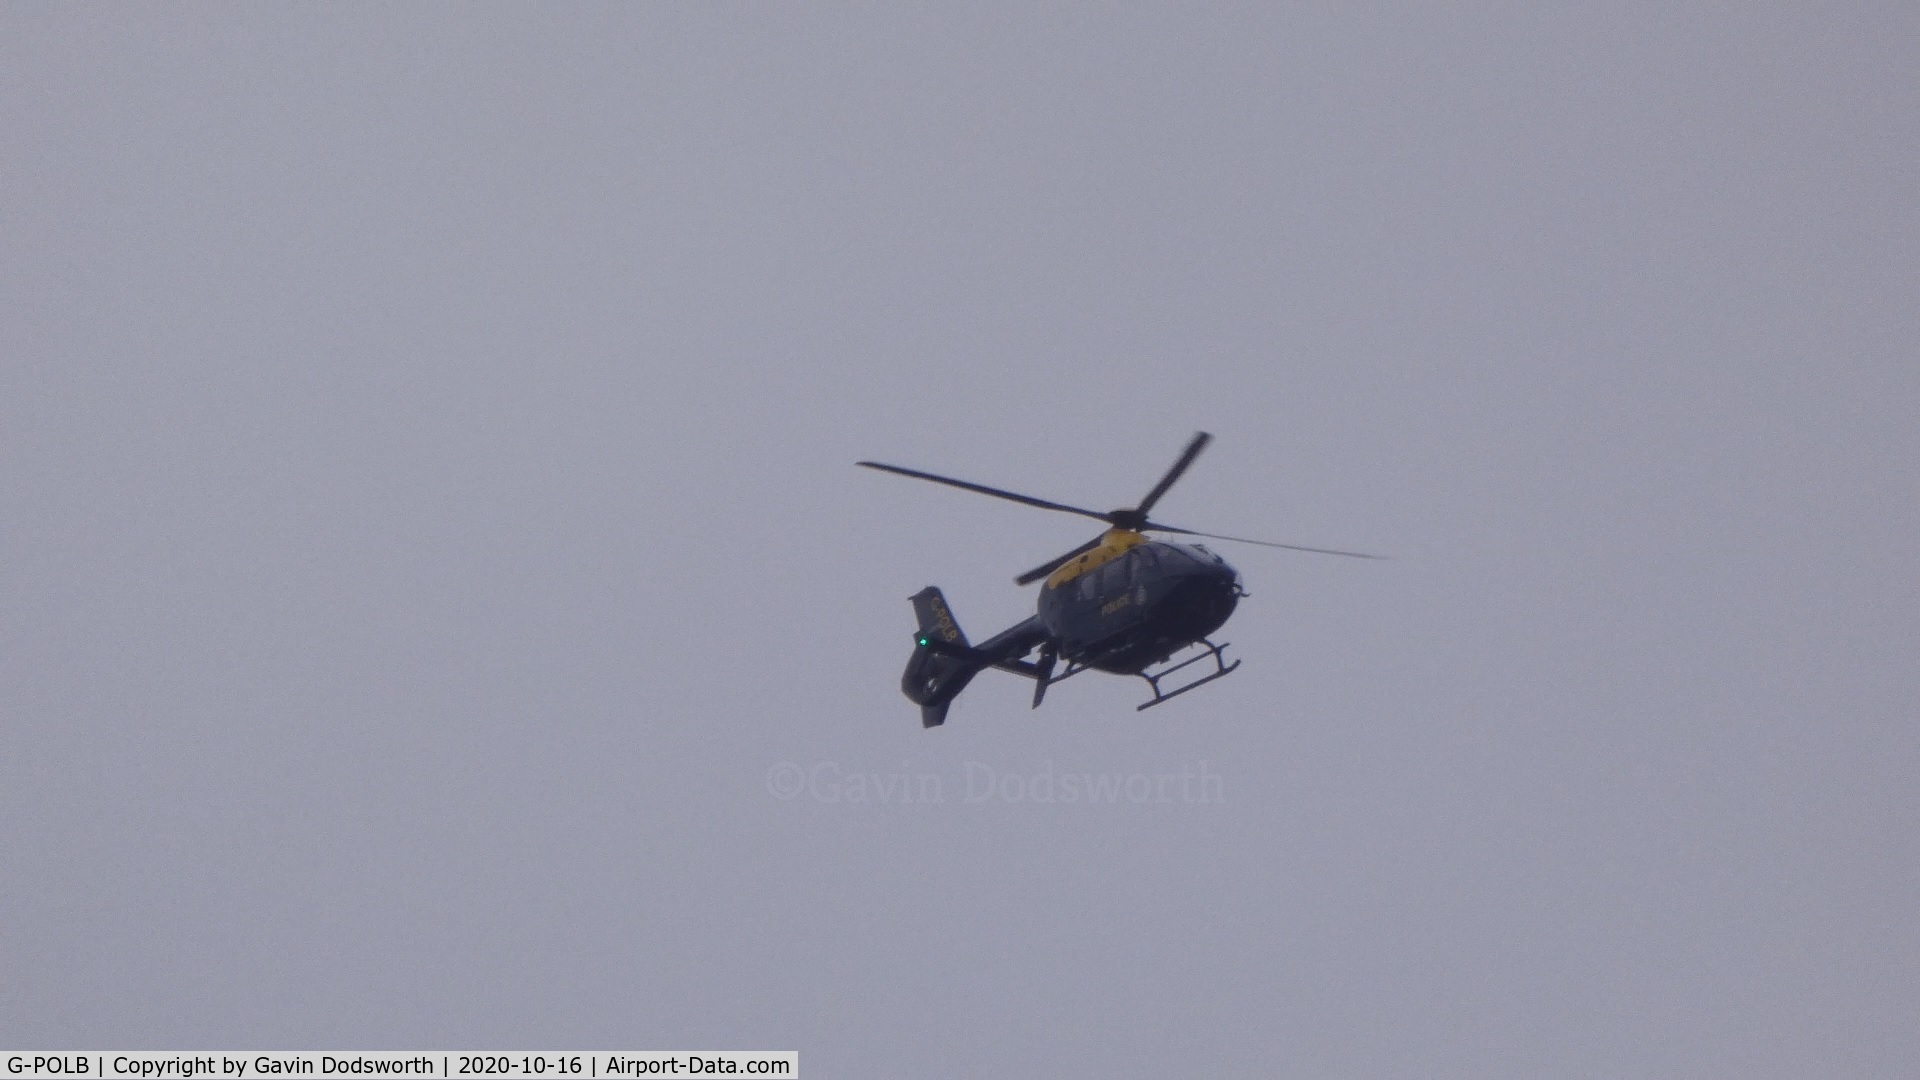 G-POLB, 2003 Eurocopter EC-135T-2 C/N 0283, Fly over Darlington on October 16th heading back to Carr Gate